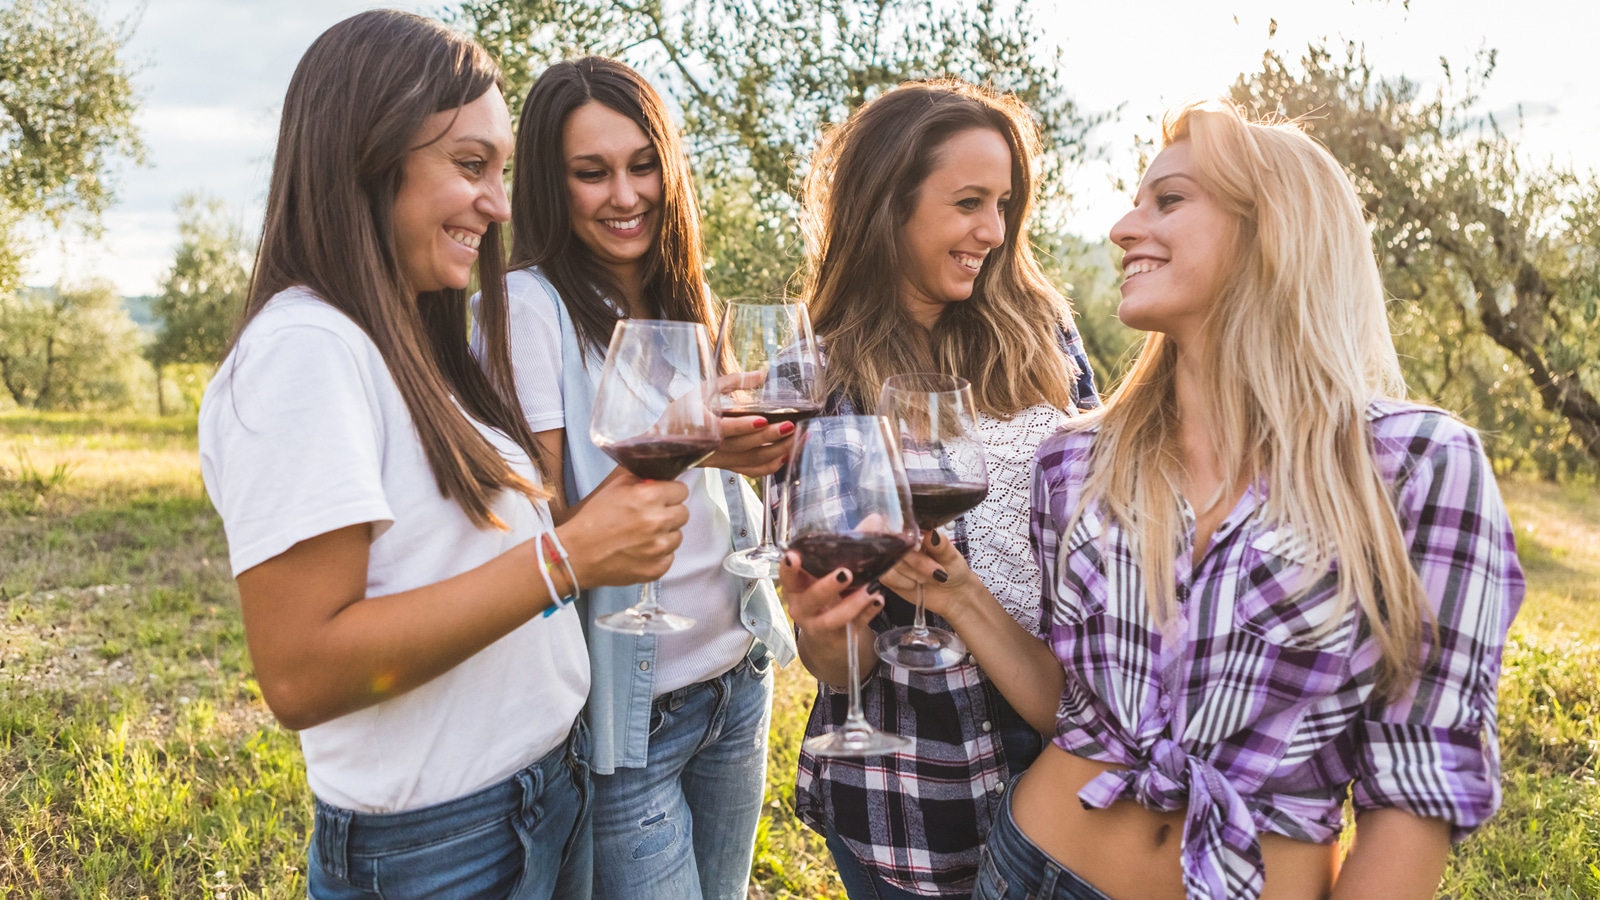 Bachelorette Parties In Nashville - Young Women On Wine Tour